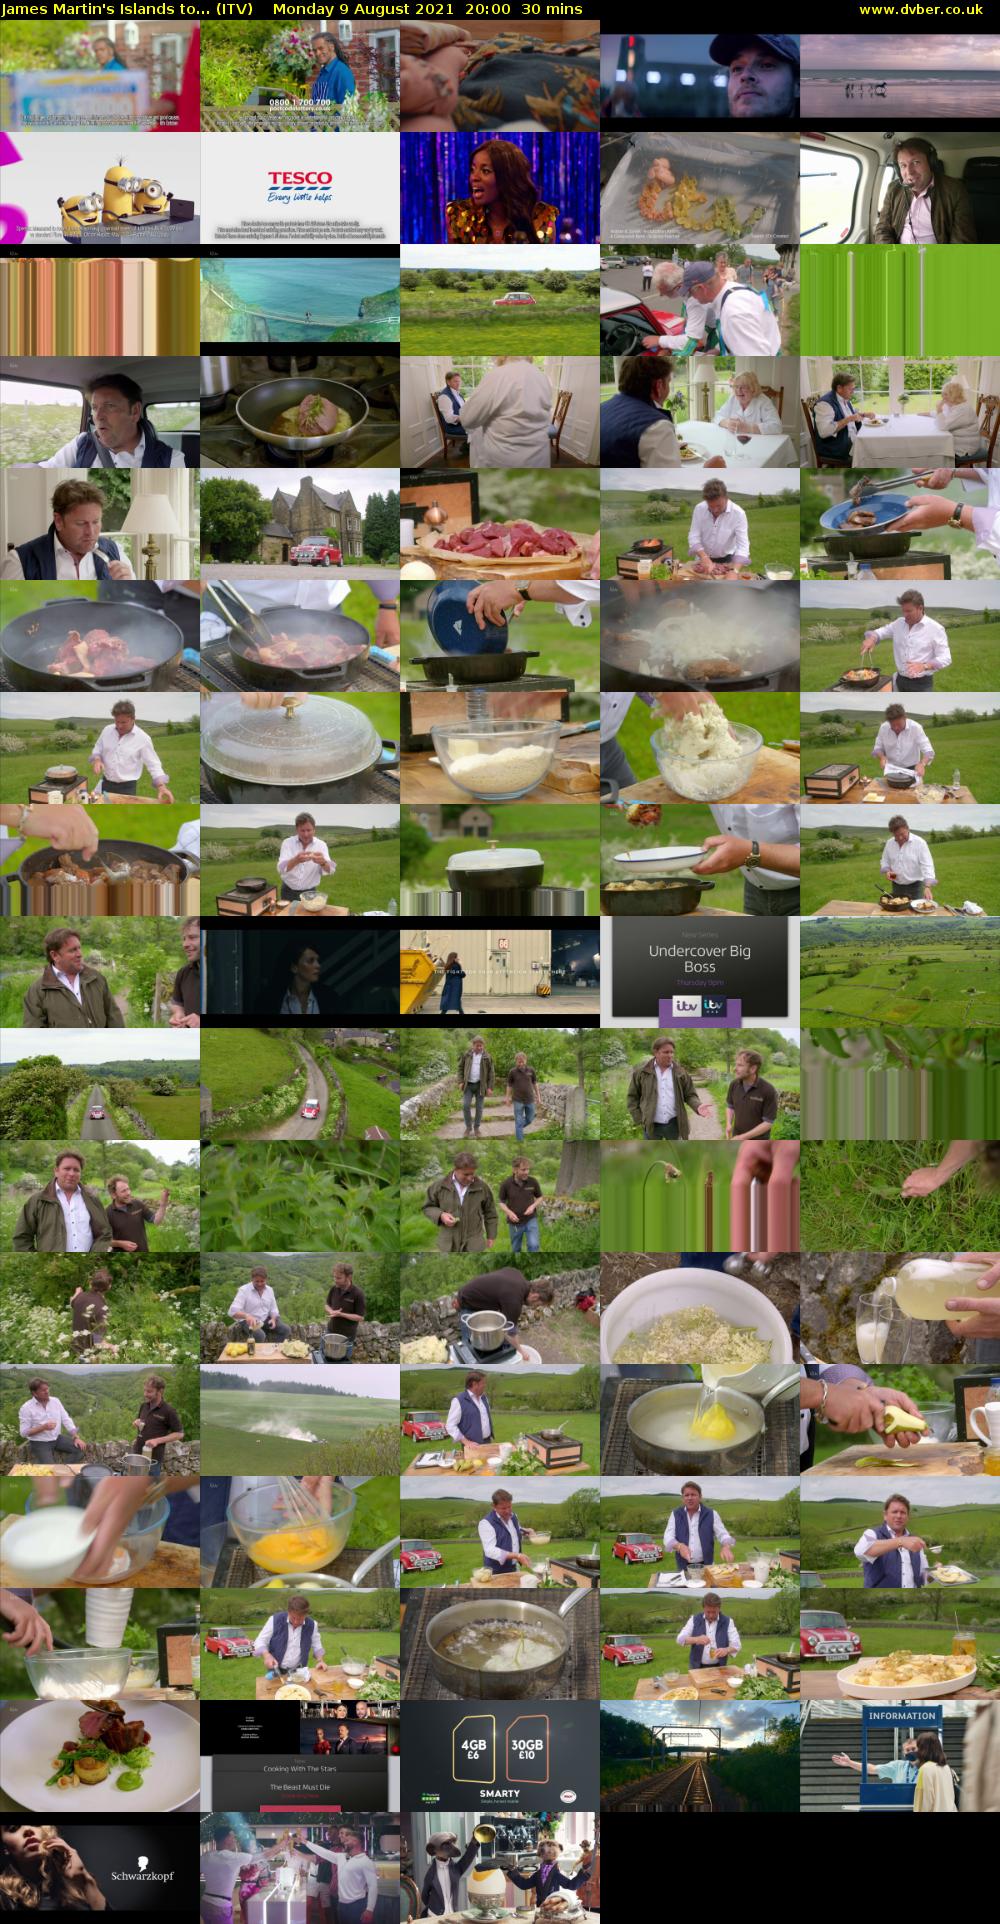 James Martin's Islands to... (ITV) Monday 9 August 2021 20:00 - 20:30